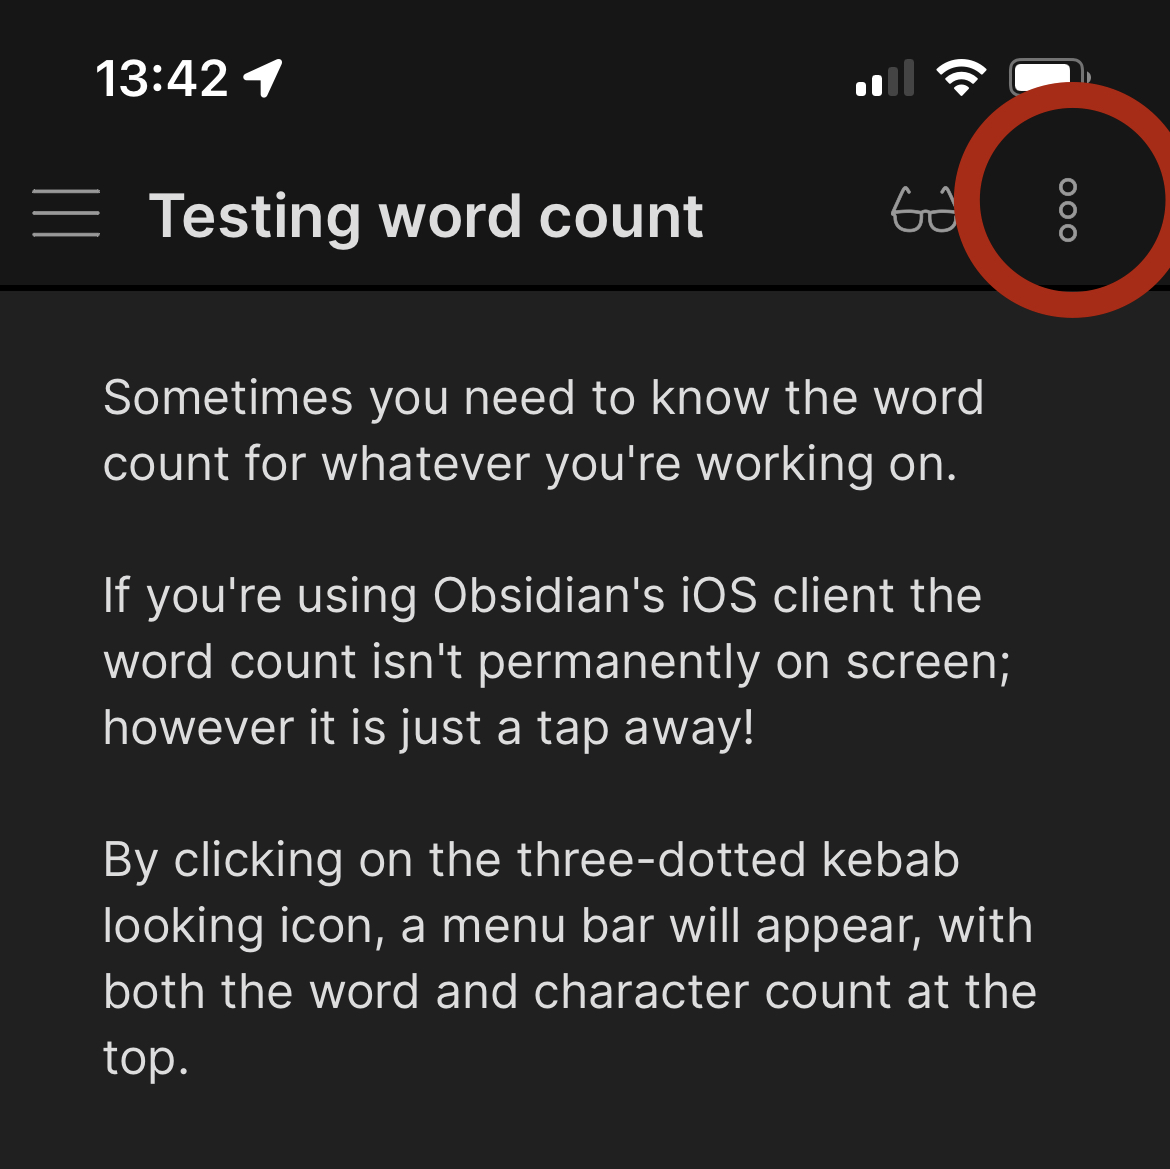 Screenshot showing the kebab icon on the top right of the screen